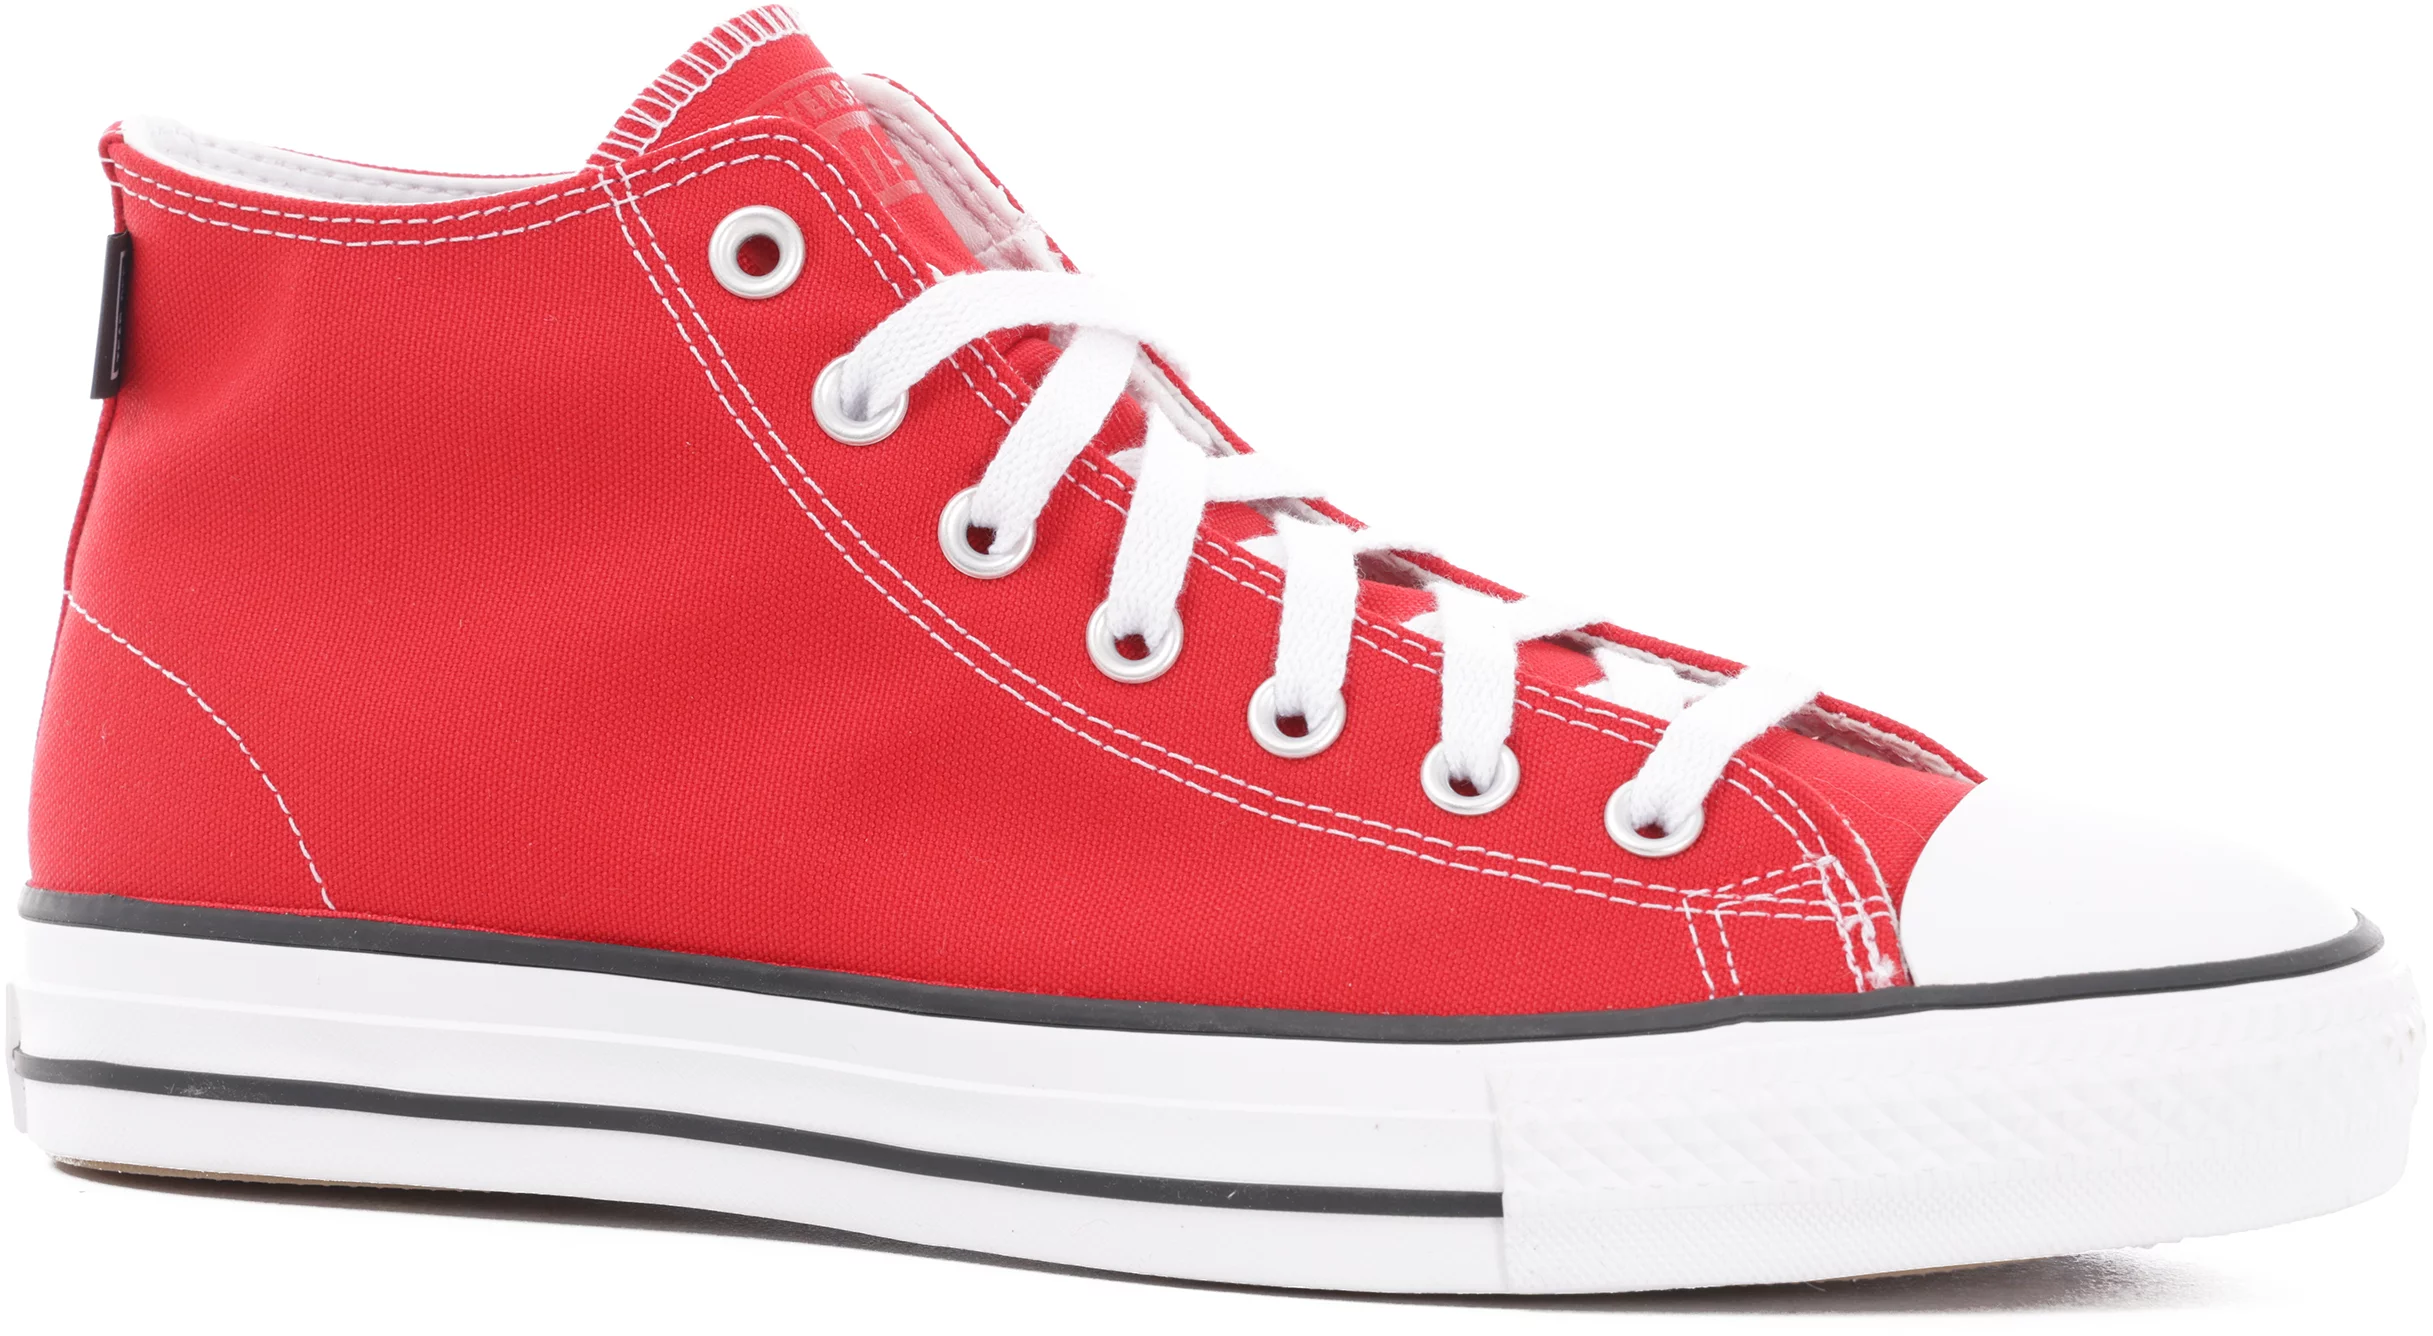 Taylor All Star Mid Skate Shoes - university red/white/black Tactics